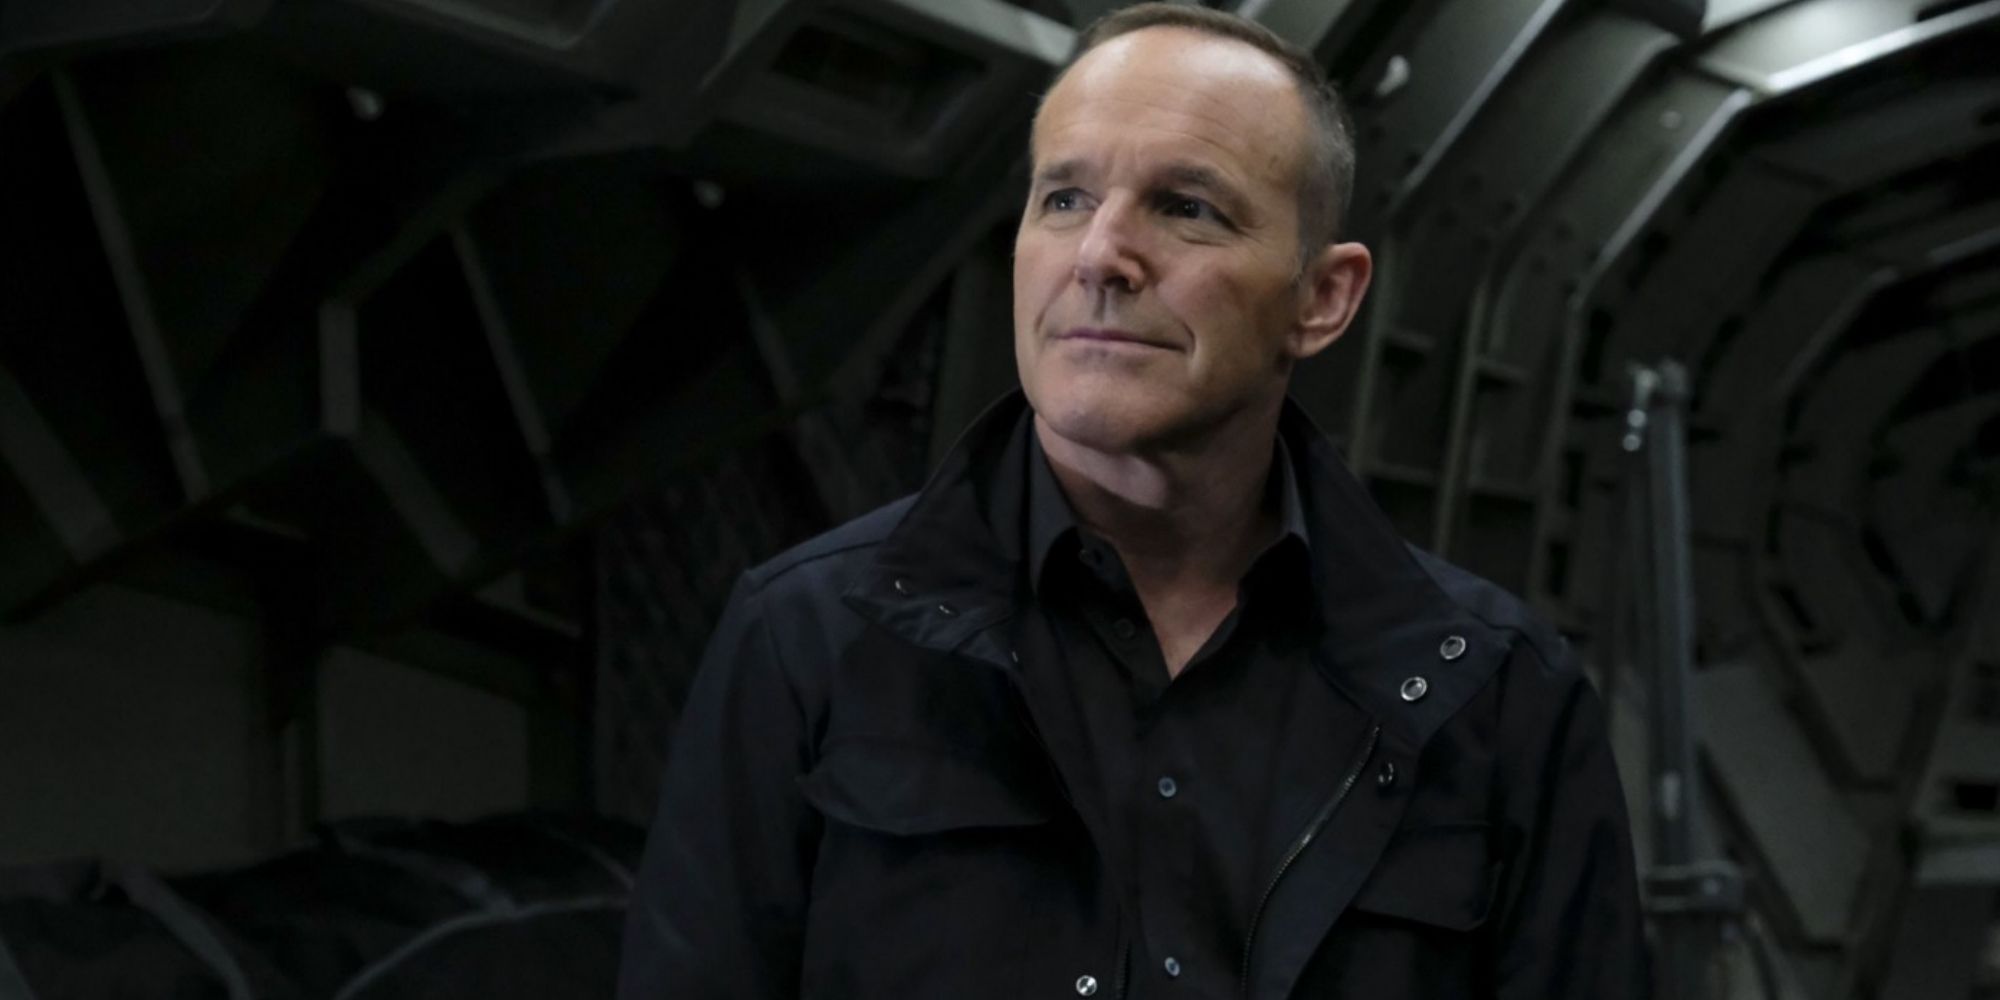 Phil Coulson (Clark Gregg) stars in 'Marvel’s Agents of S.H.I.E.L.D' after his apparent death in 'The Avengers'.